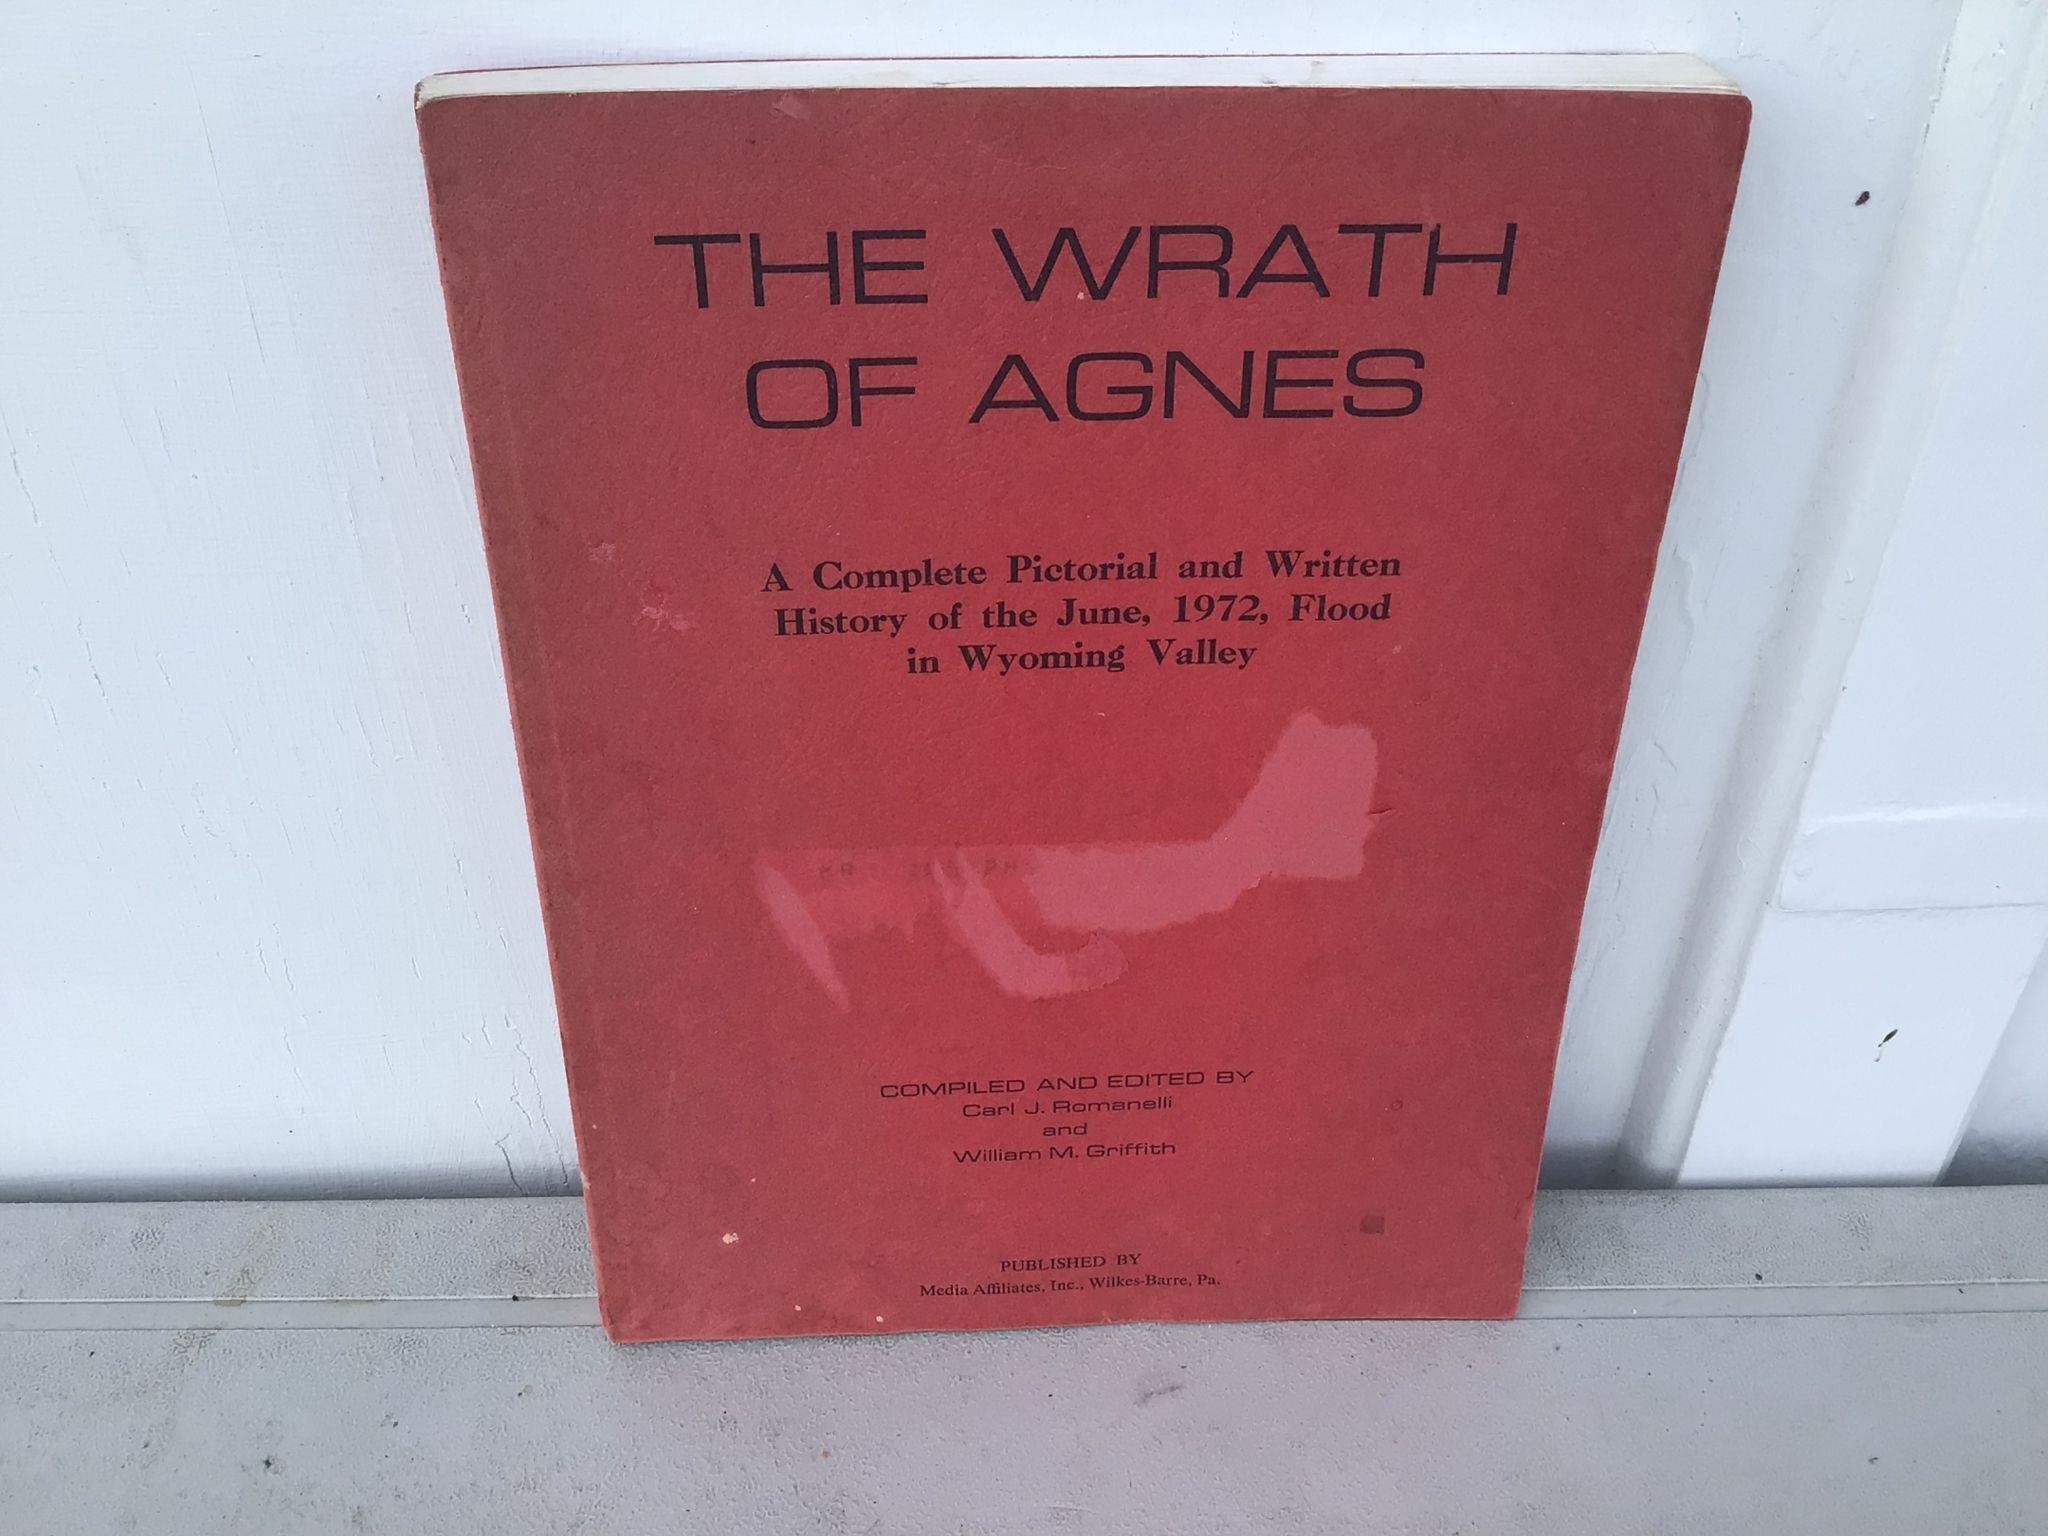 THE WRATH OF AGNES = HISTORY OF JUNE 1972 FLOOD